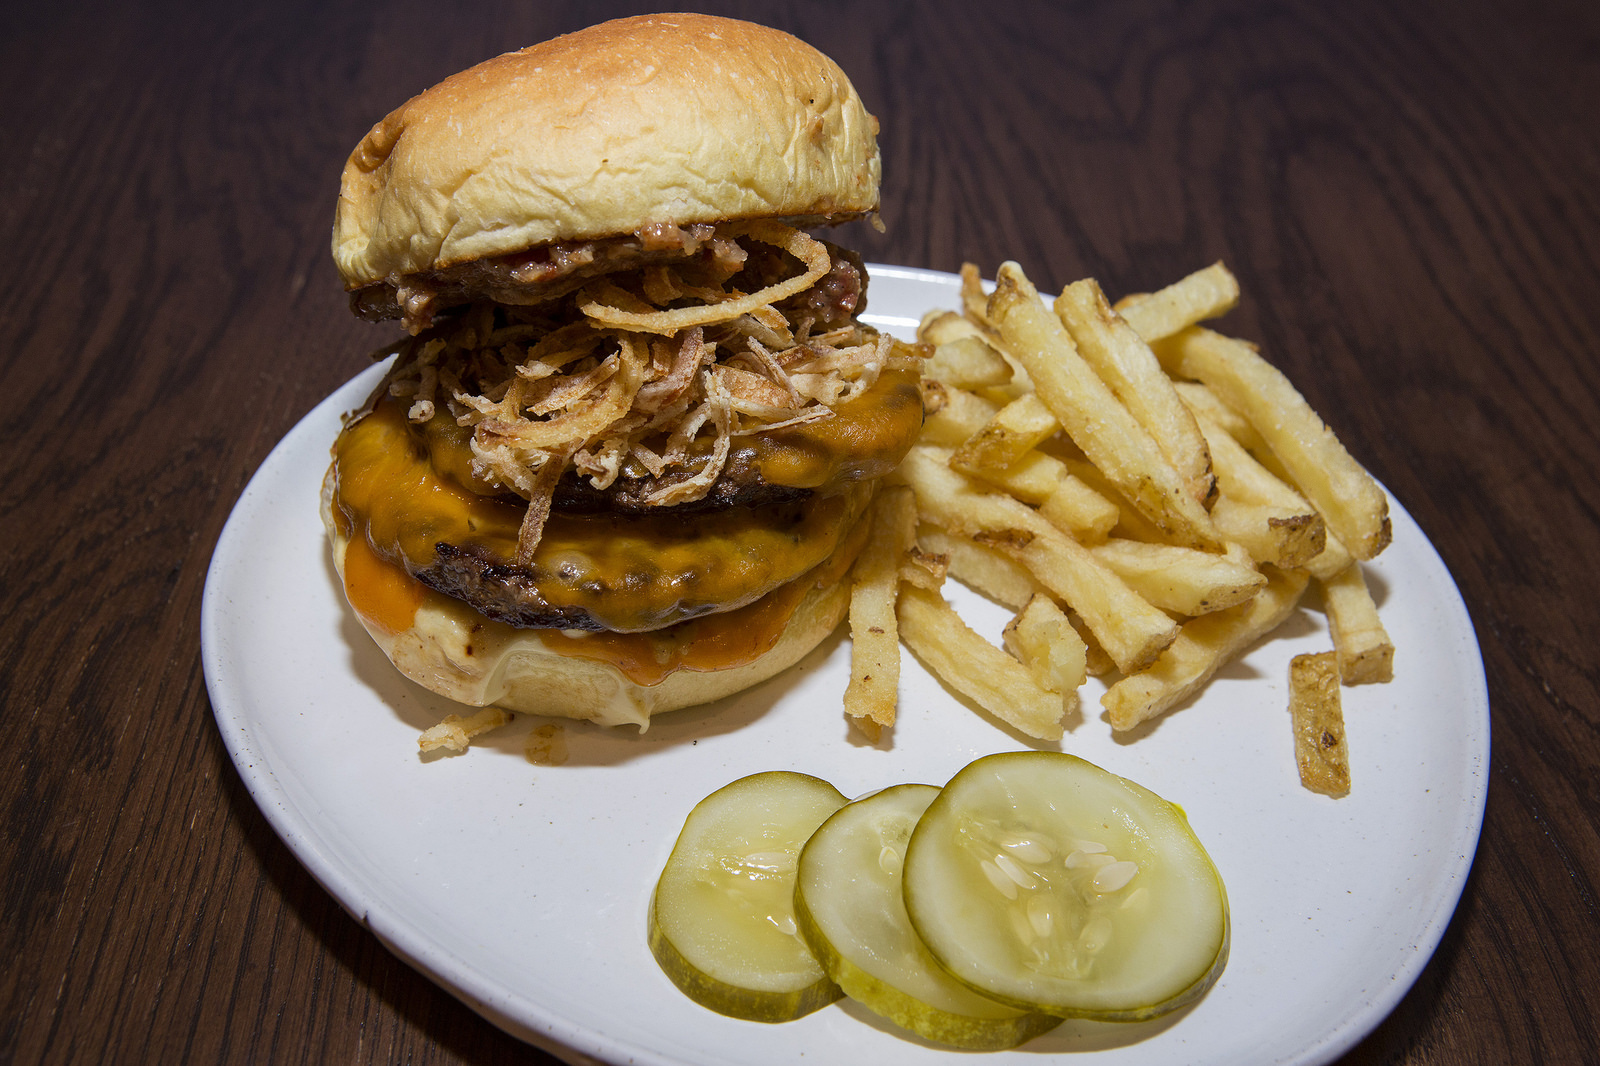 A very stuffed burger on a plate with fries and pickle slices.